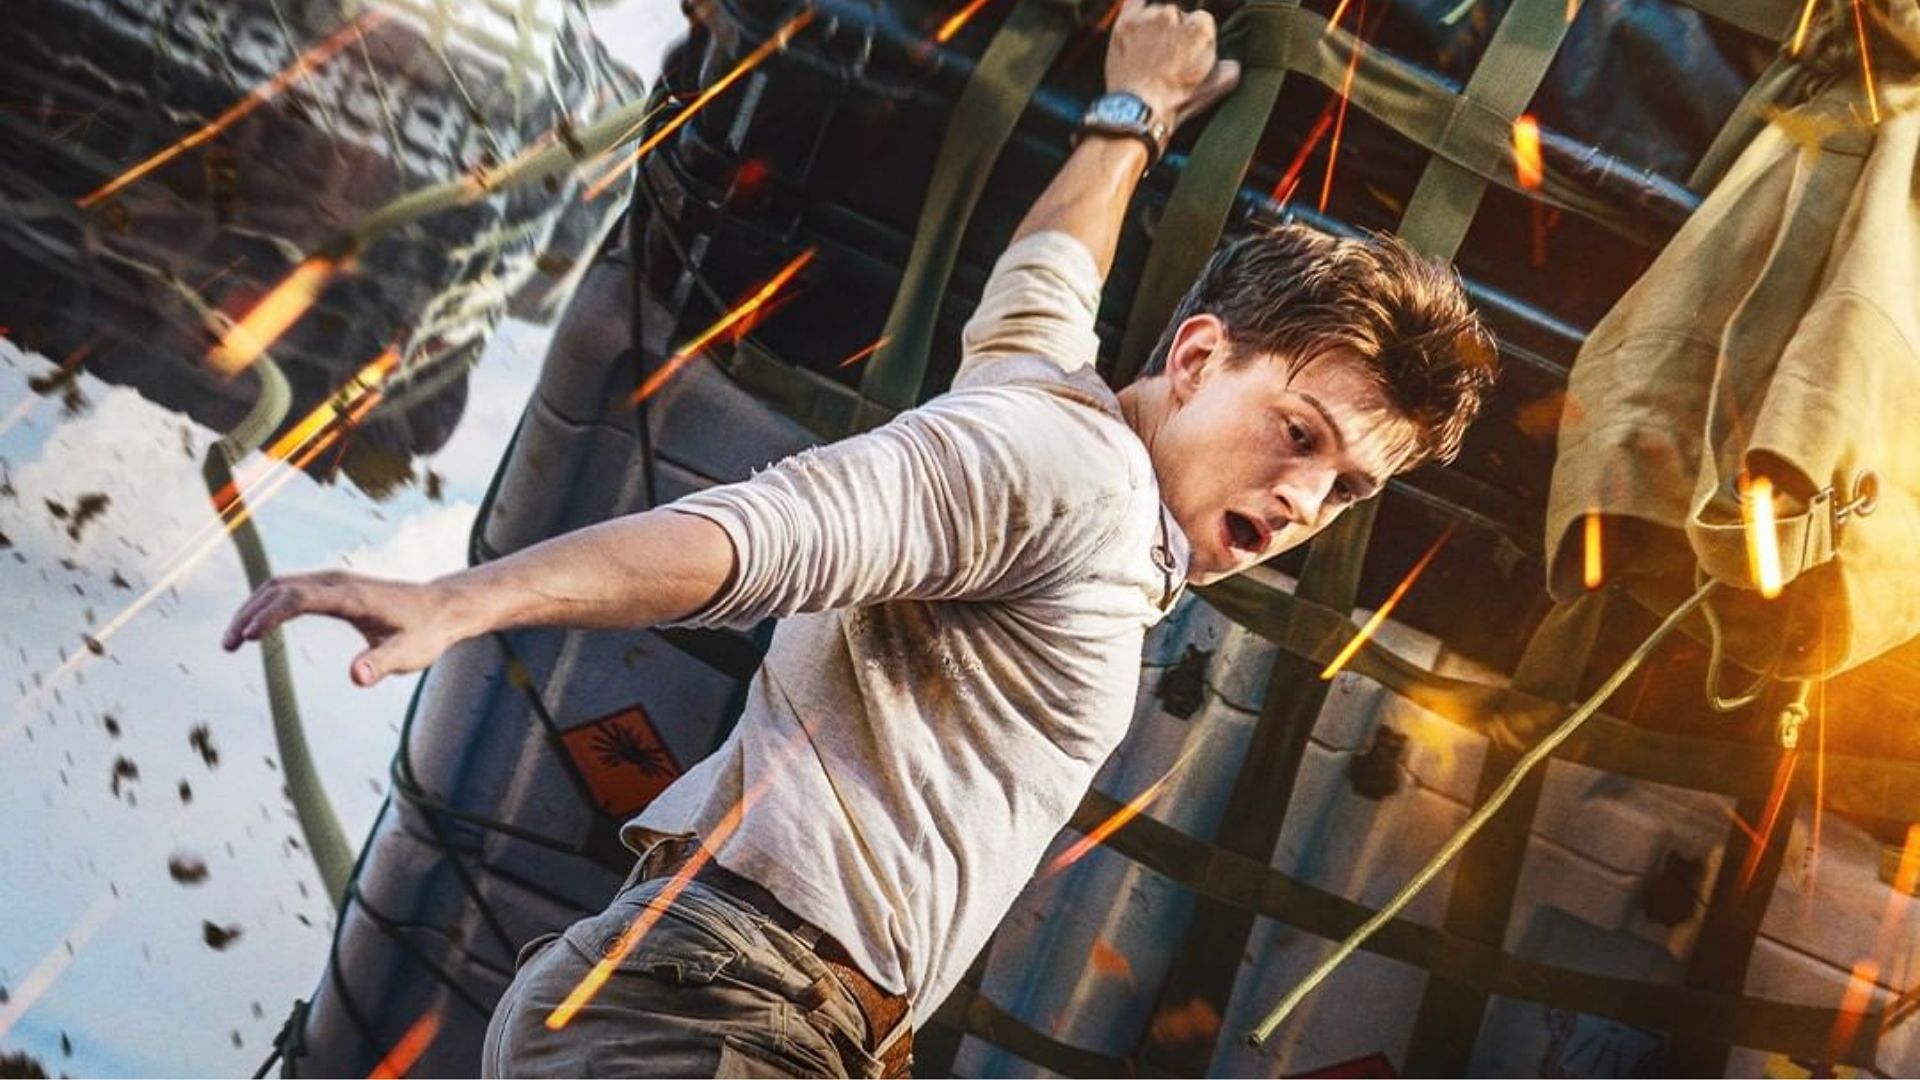 Tom Holland's Nathan Drake Gets His Own Uncharted Action Figure